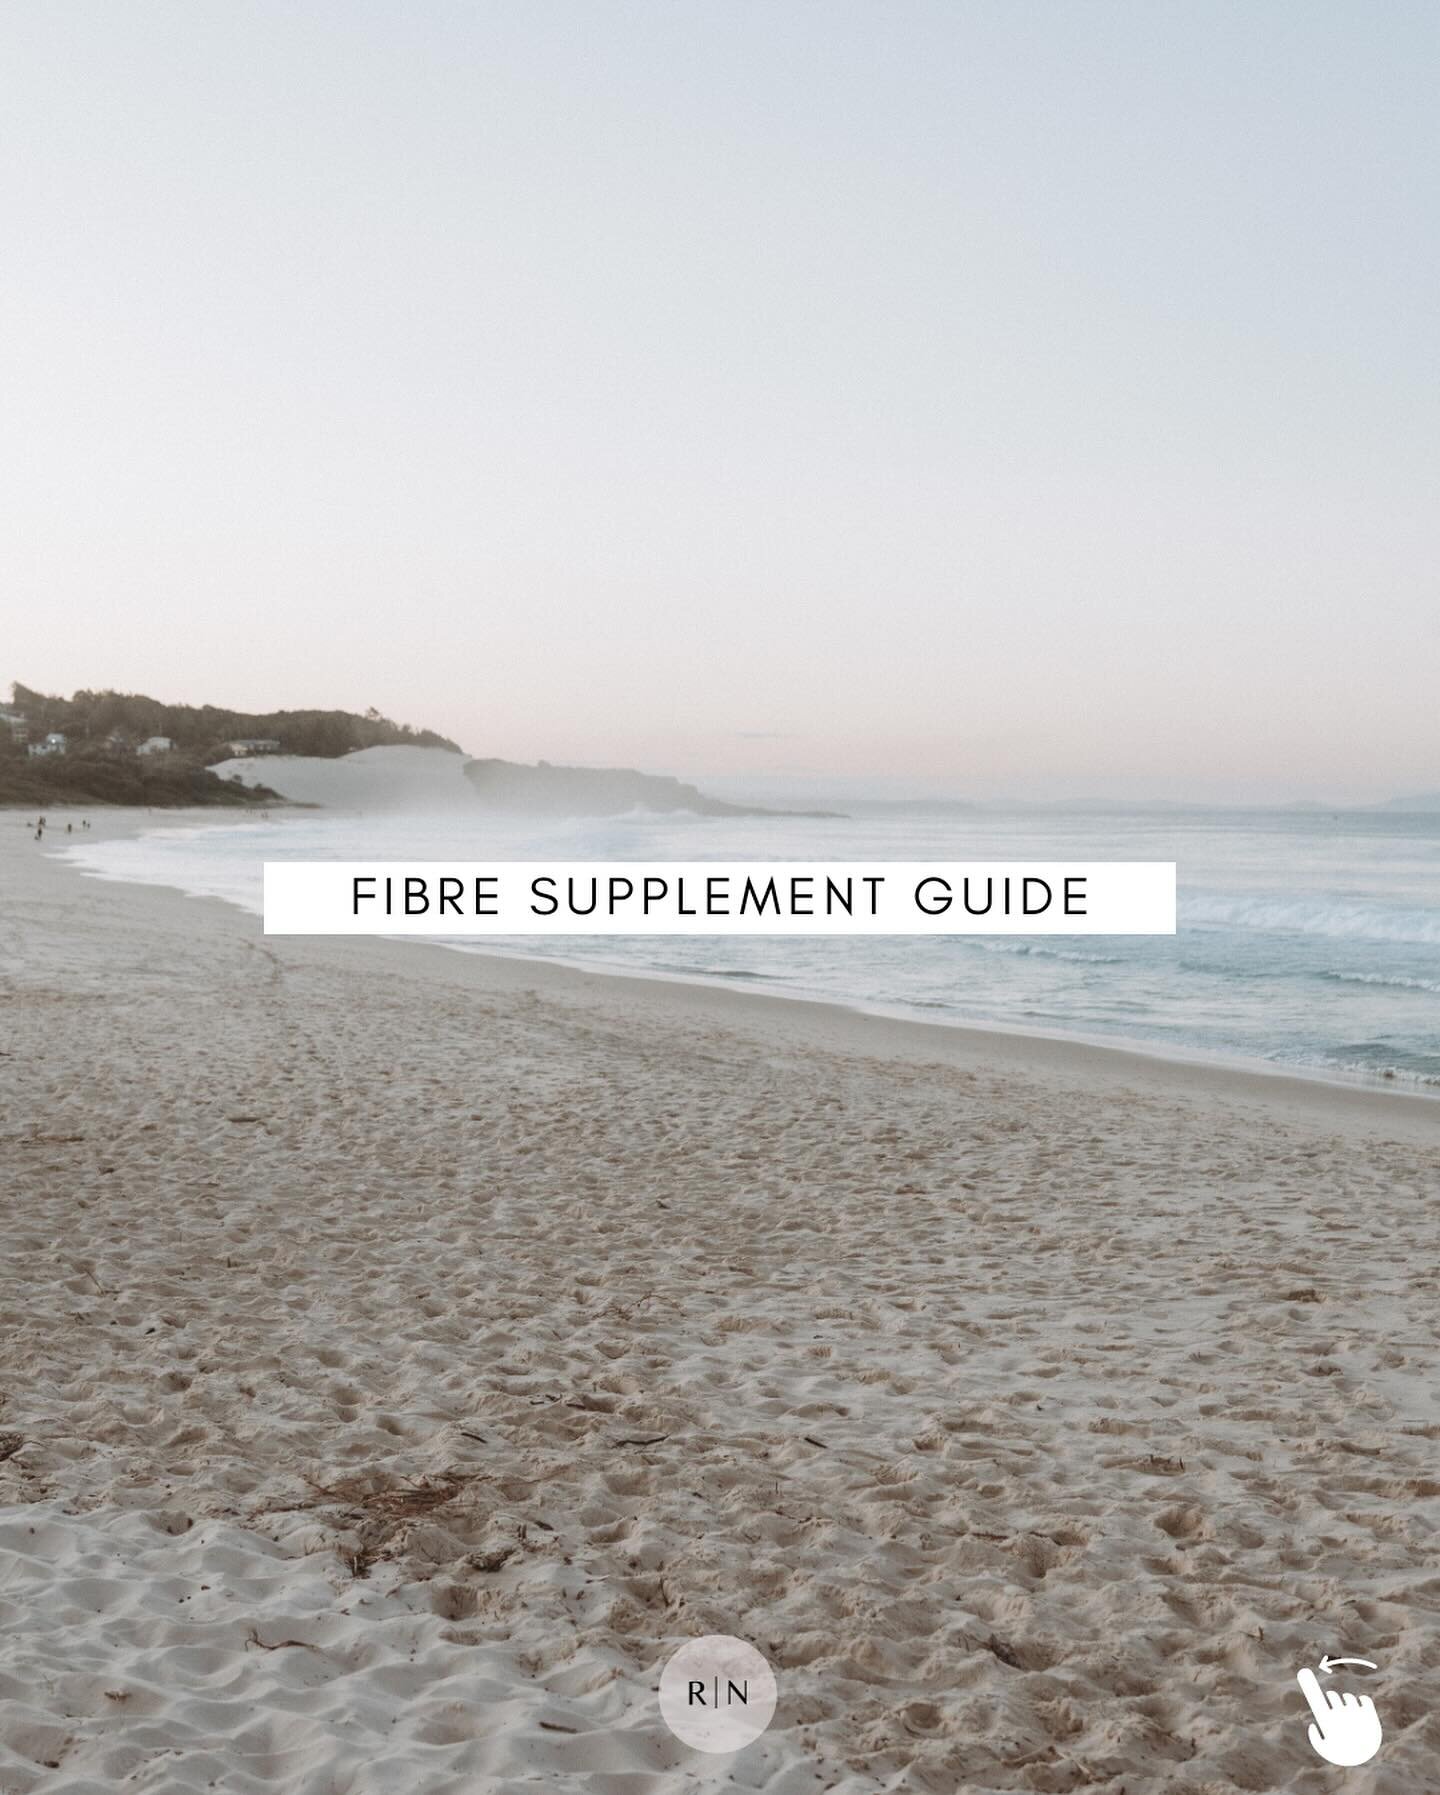 Fibre supplements can be helpful for some to fill any gaps in the diet. They may help prevent constipation, reduce cholesterol levels, manage weight, and balance blood sugar levels. This post highlights some examples of fibre supplements available. I